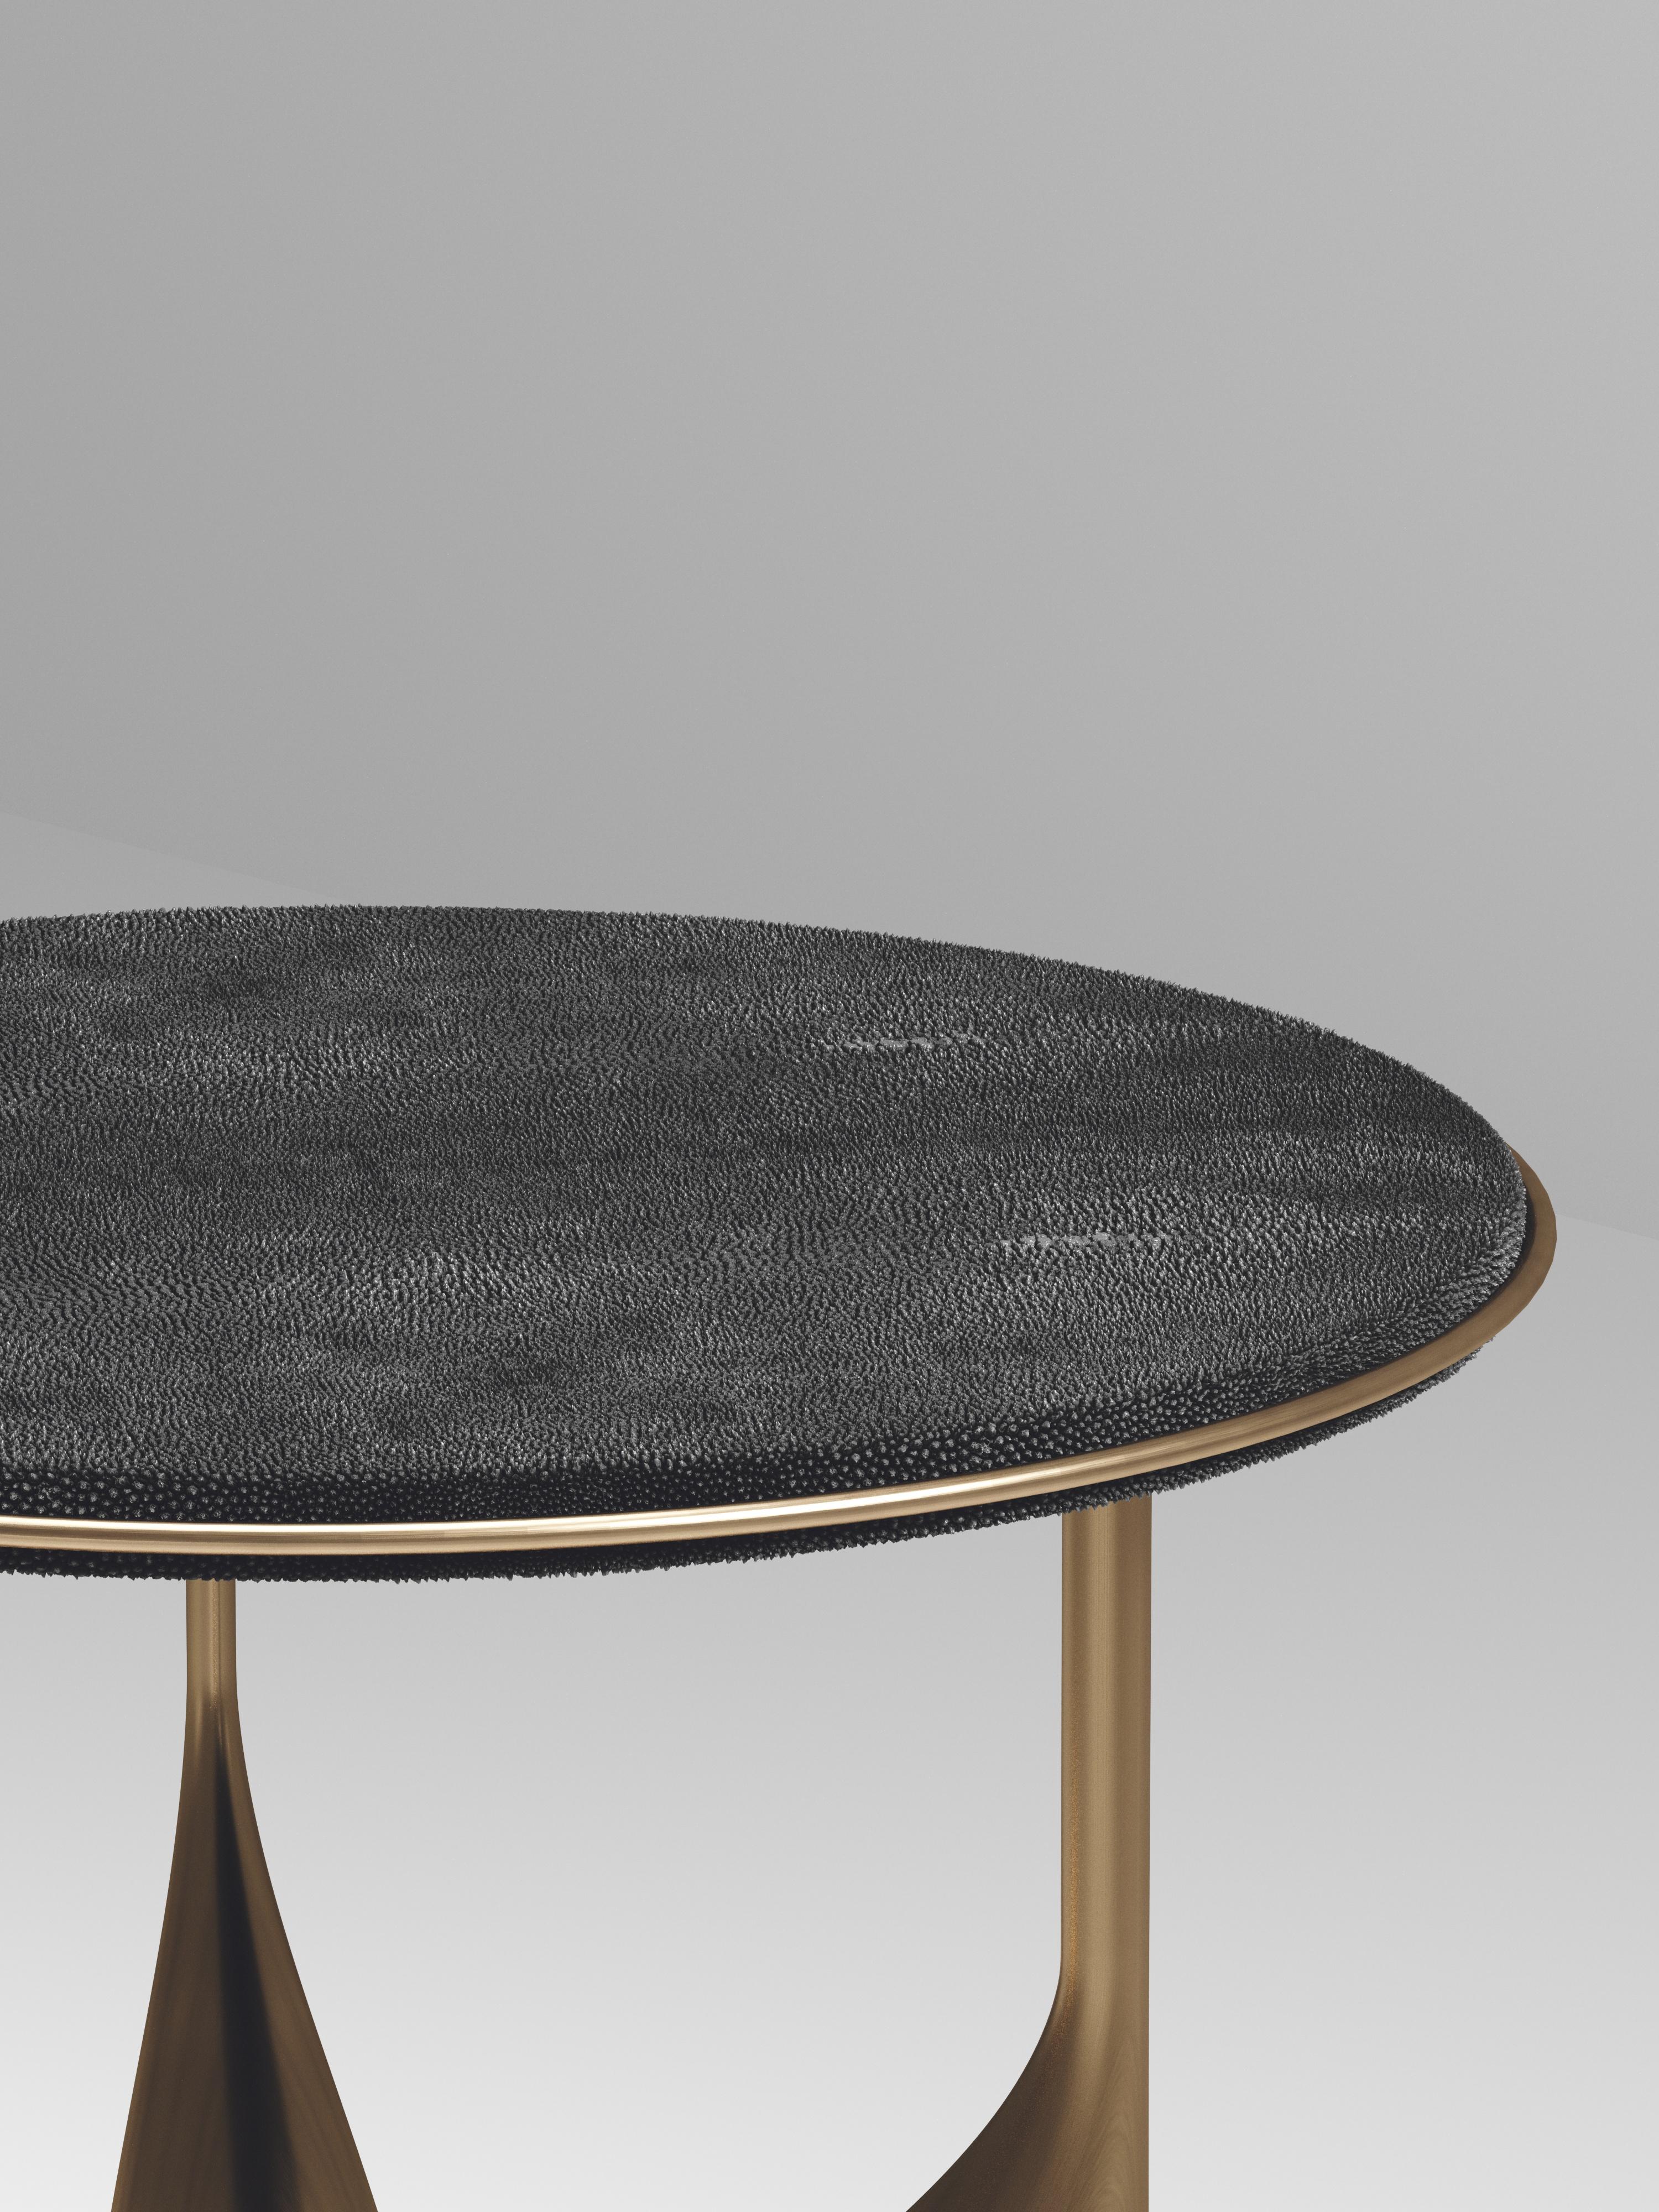 The Plumeria Side Table II by Kifu Paris is a dramatic and sculptural piece. The coal black shagreen inlaid top sits on a sculptural bronze-patina brass base that is conceptually inspired by bird feathers floating on top of a lake. The border of the